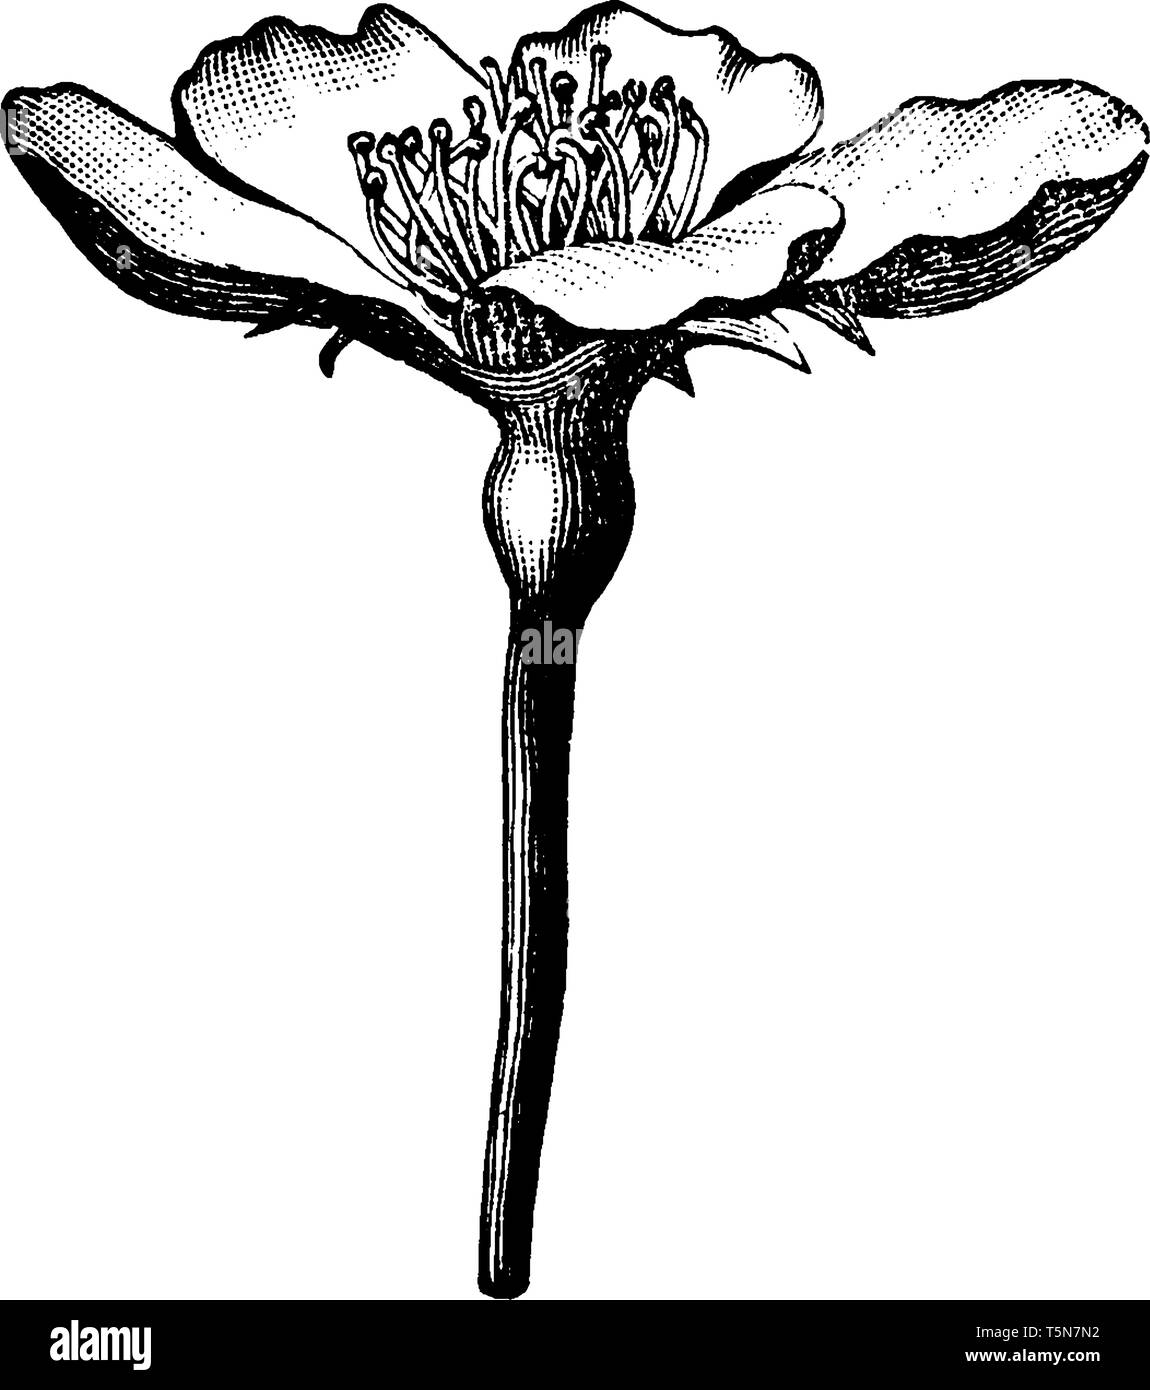 A picture of Bartlett pear flower. The flower's color is mostly white with five petals. Flower stalk is long and narrow, vintage line drawing or engra Stock Vector